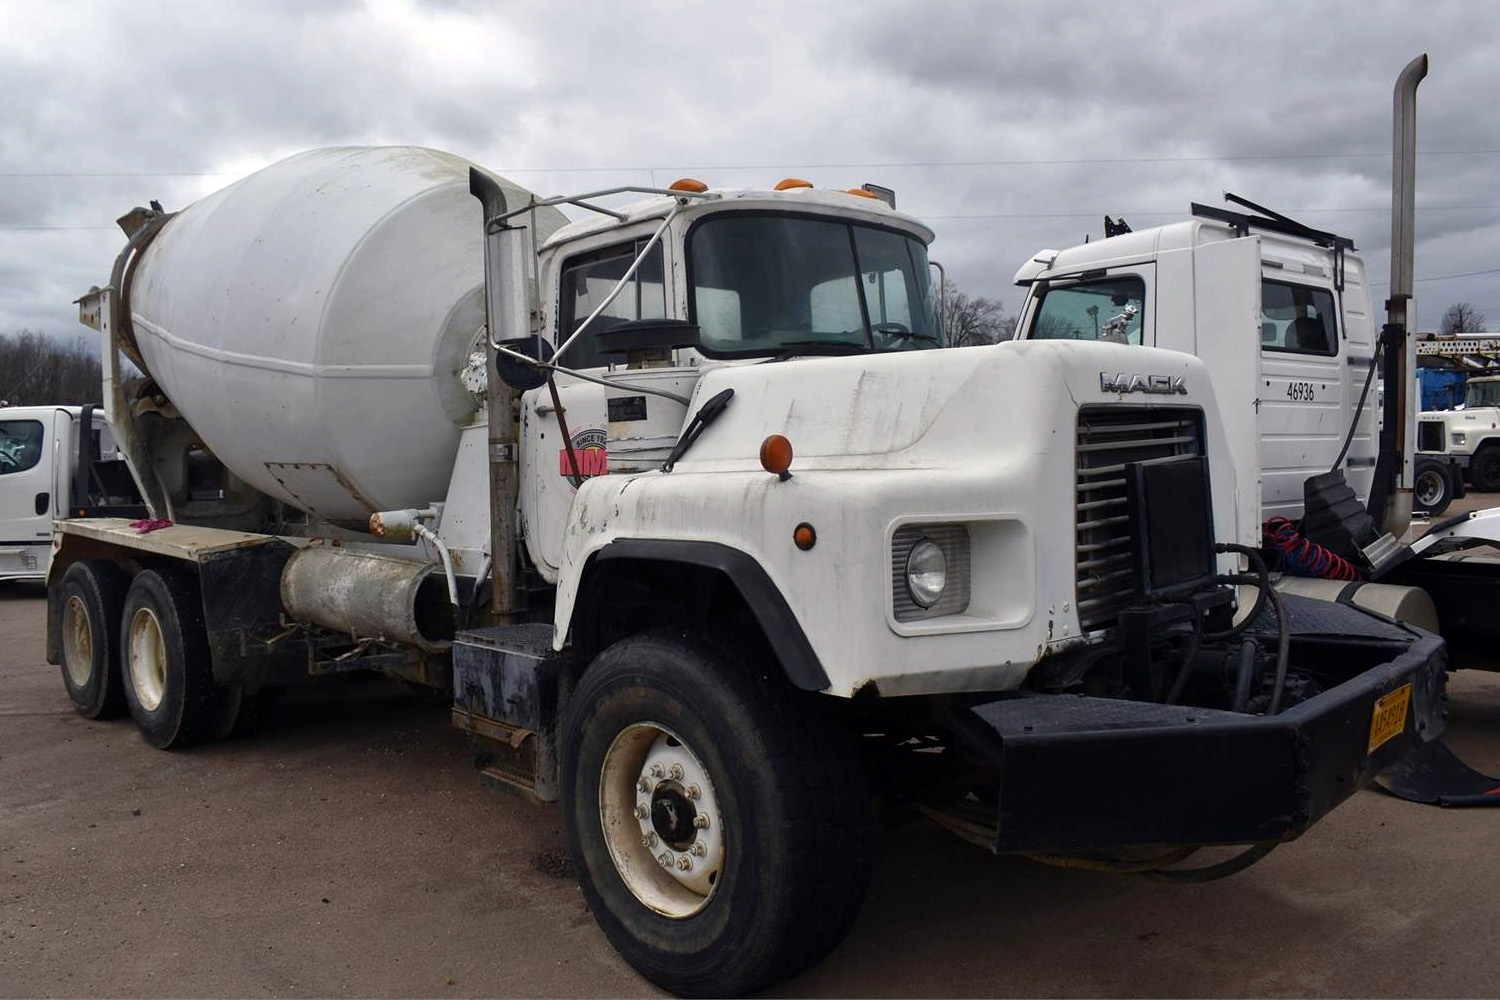 8-10 Cubic yard concrete truck weighing approximately 25,000 pound made by Mack.